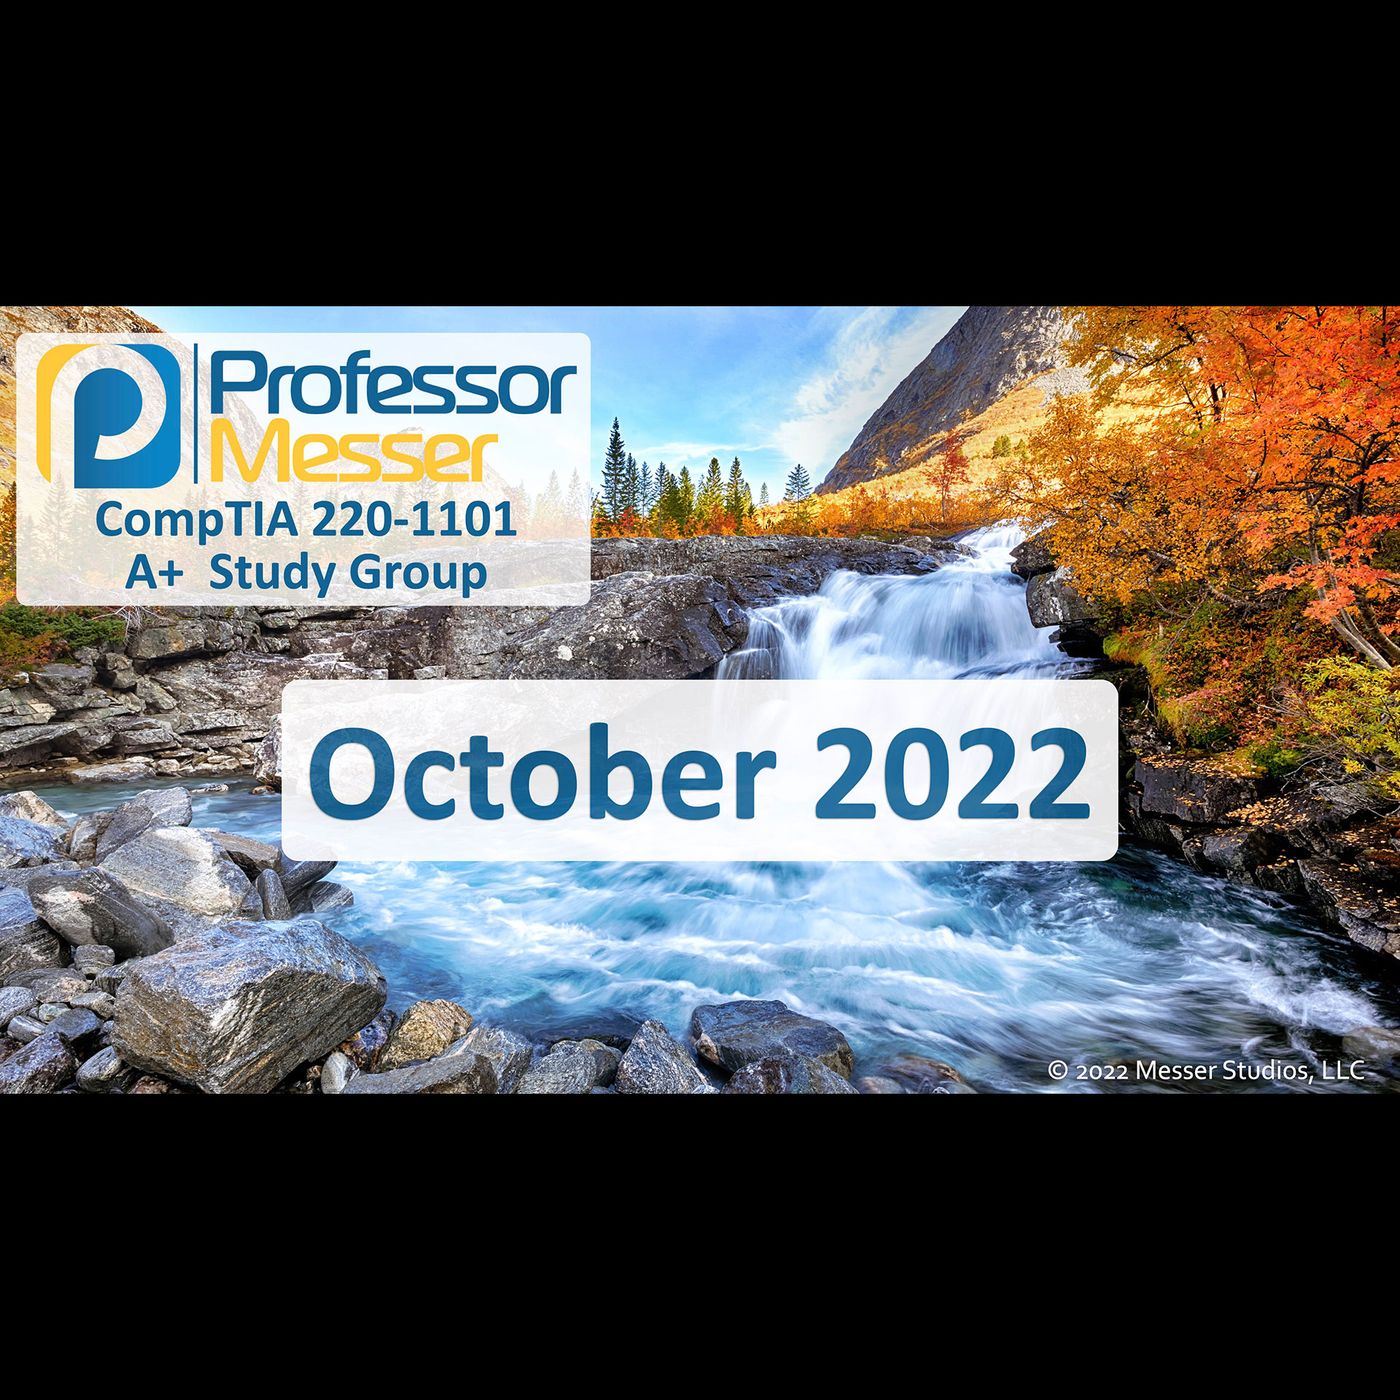 Professor Messer's CompTIA 220-1101 A+ Study Group After Show - October 2022